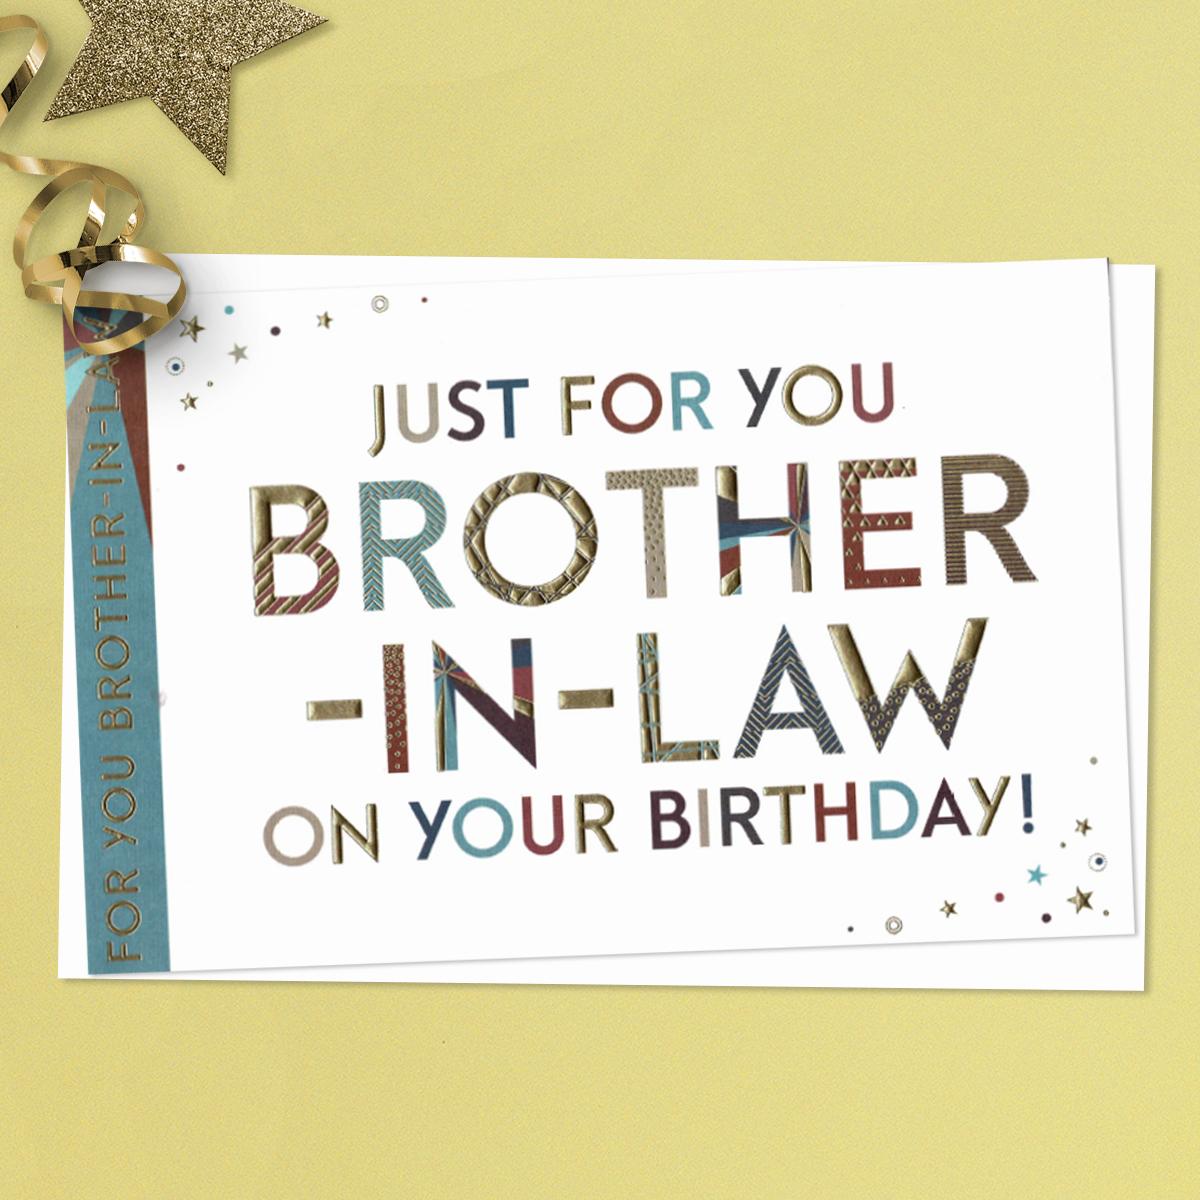 Just For You Brother In Law On Your Birthday Featuring Multi Colour Foil Lettering. Complete With White Envelope